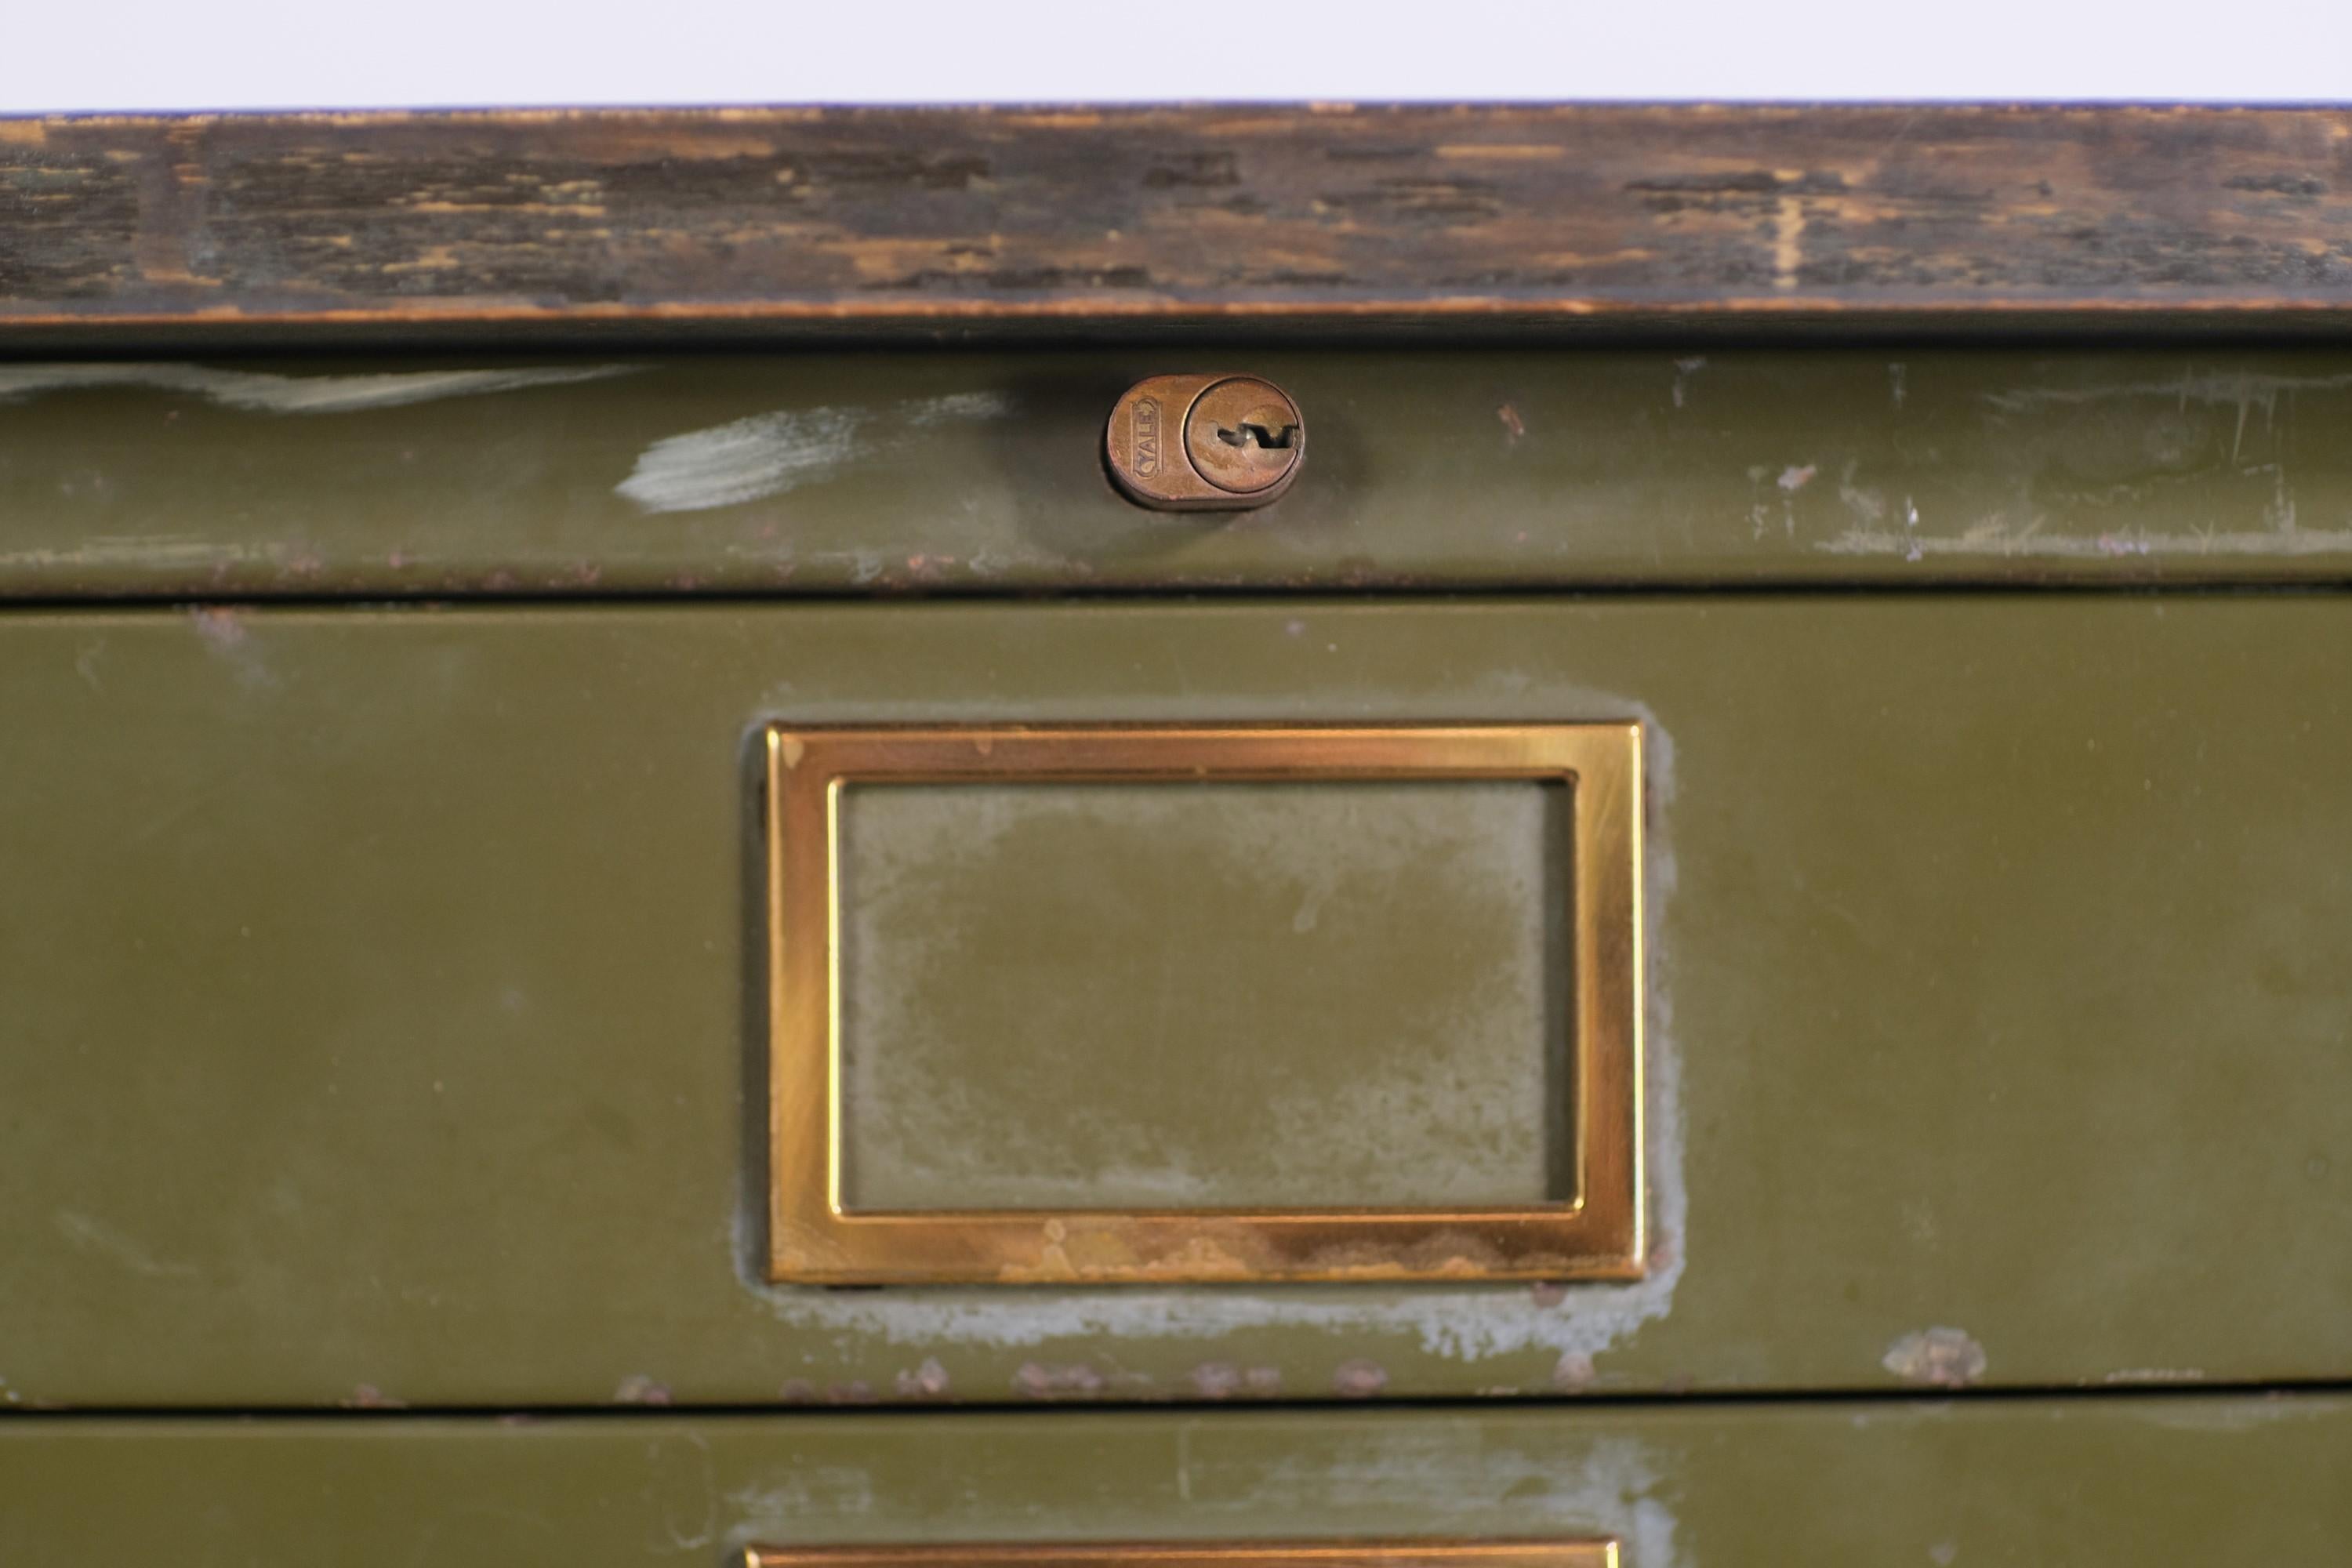 Early 20th Century stacking US Army green flat or map file cabinet. Comes with a well worn replacement wood top. Original brass hardware. This can be seen at our 1800 South Grand Ave location in Downtown LA.